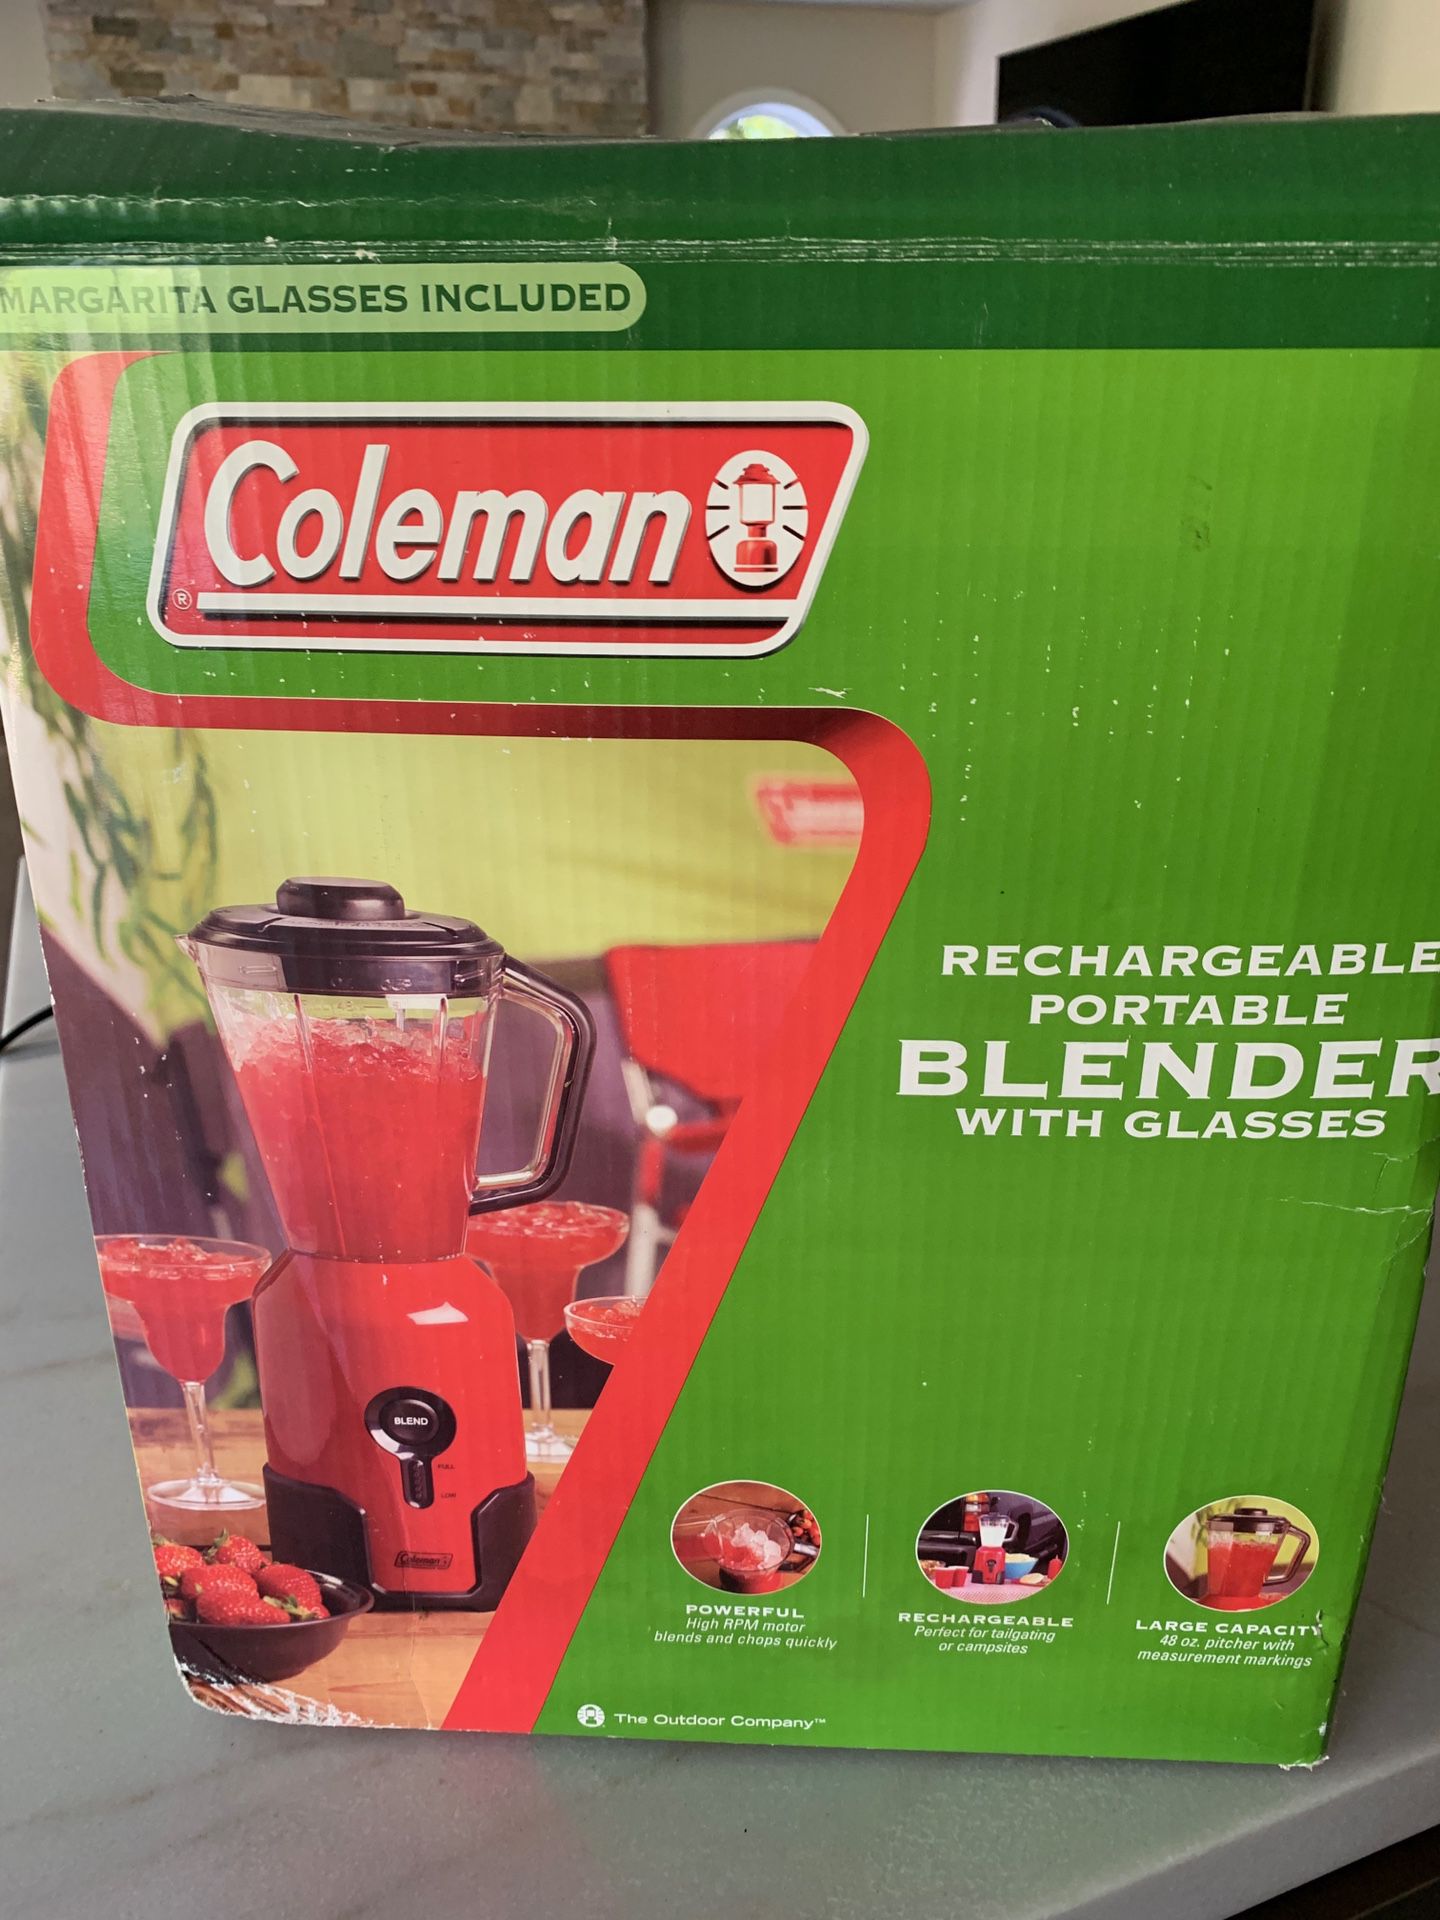 Brand new Coleman blender with glasses